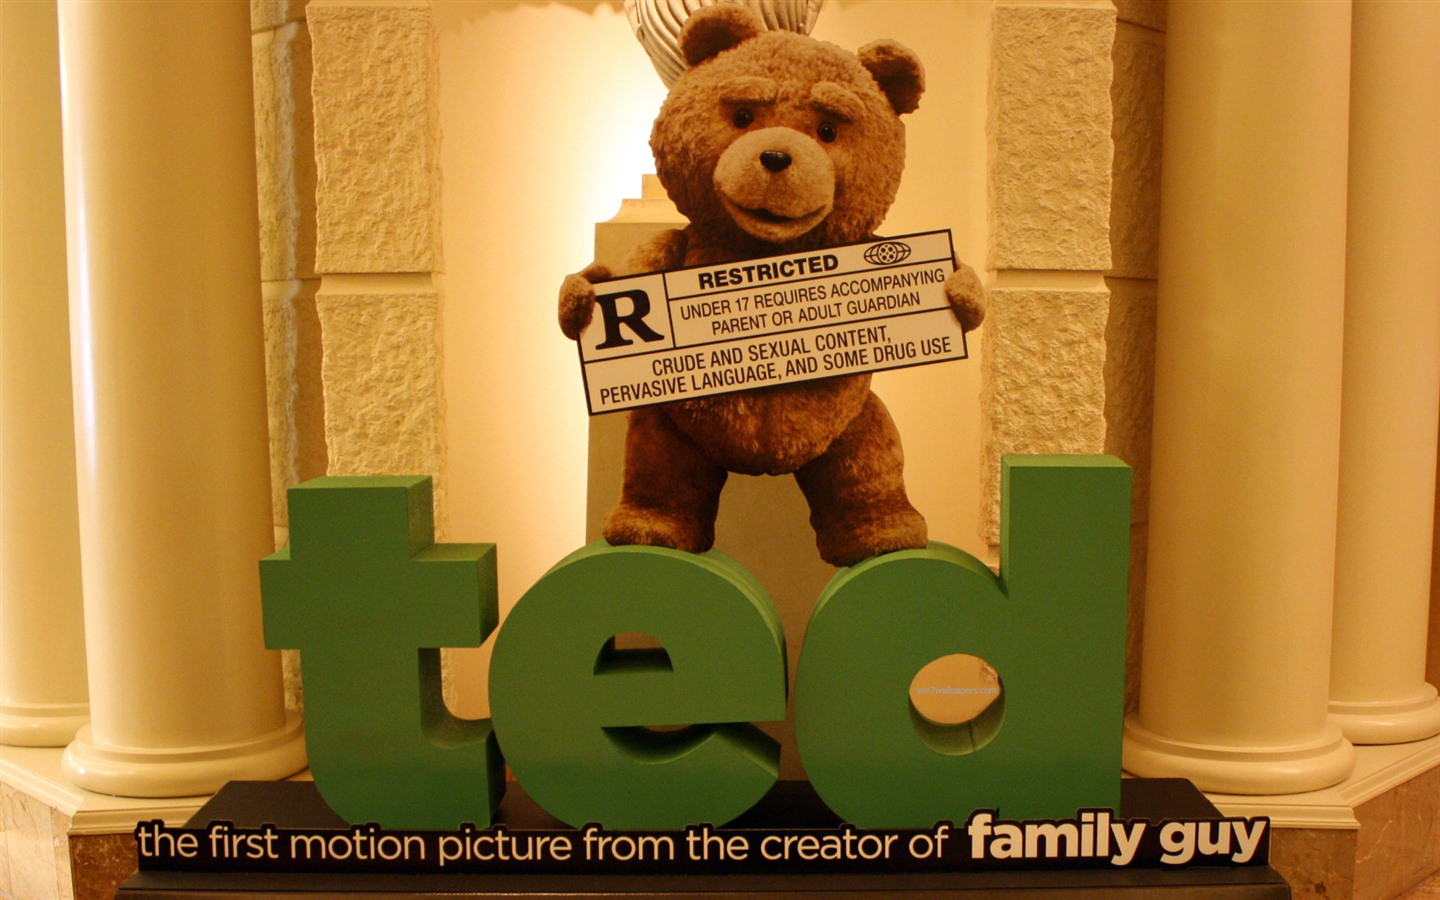 Ted 2012 HD movie wallpapers #7 - 1440x900